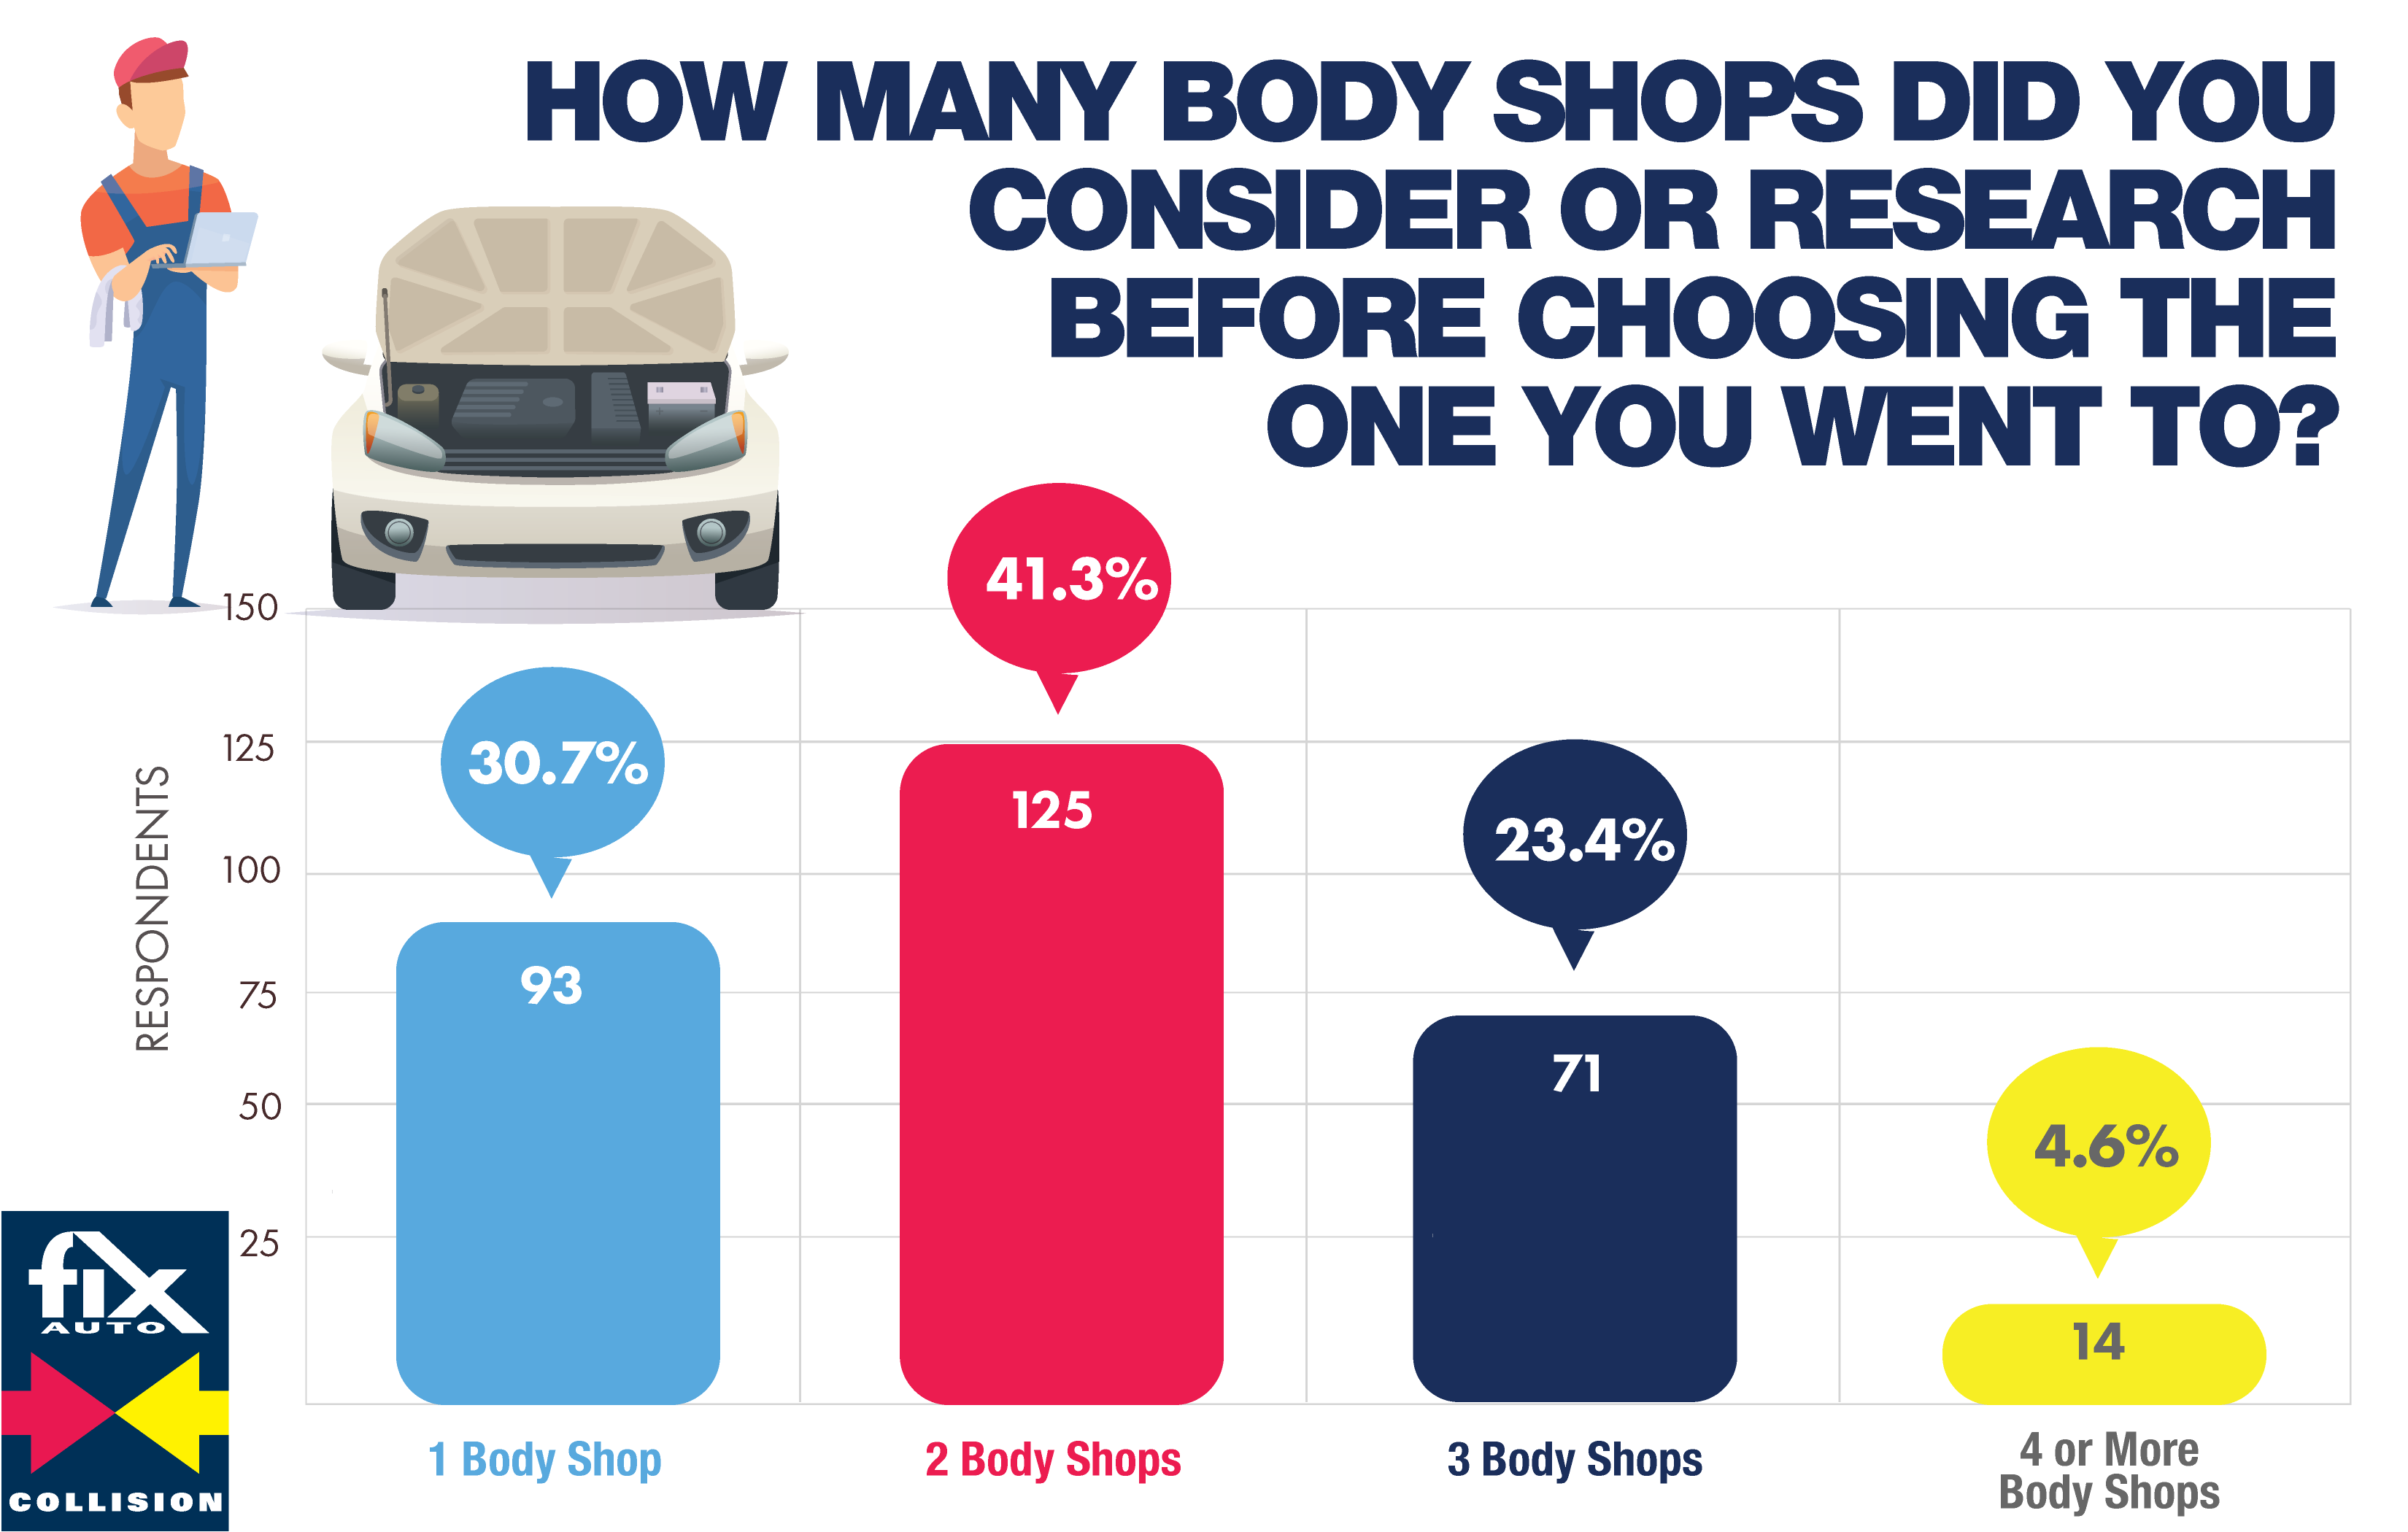 how many body shops did you consider or research before choosing the one you went to?